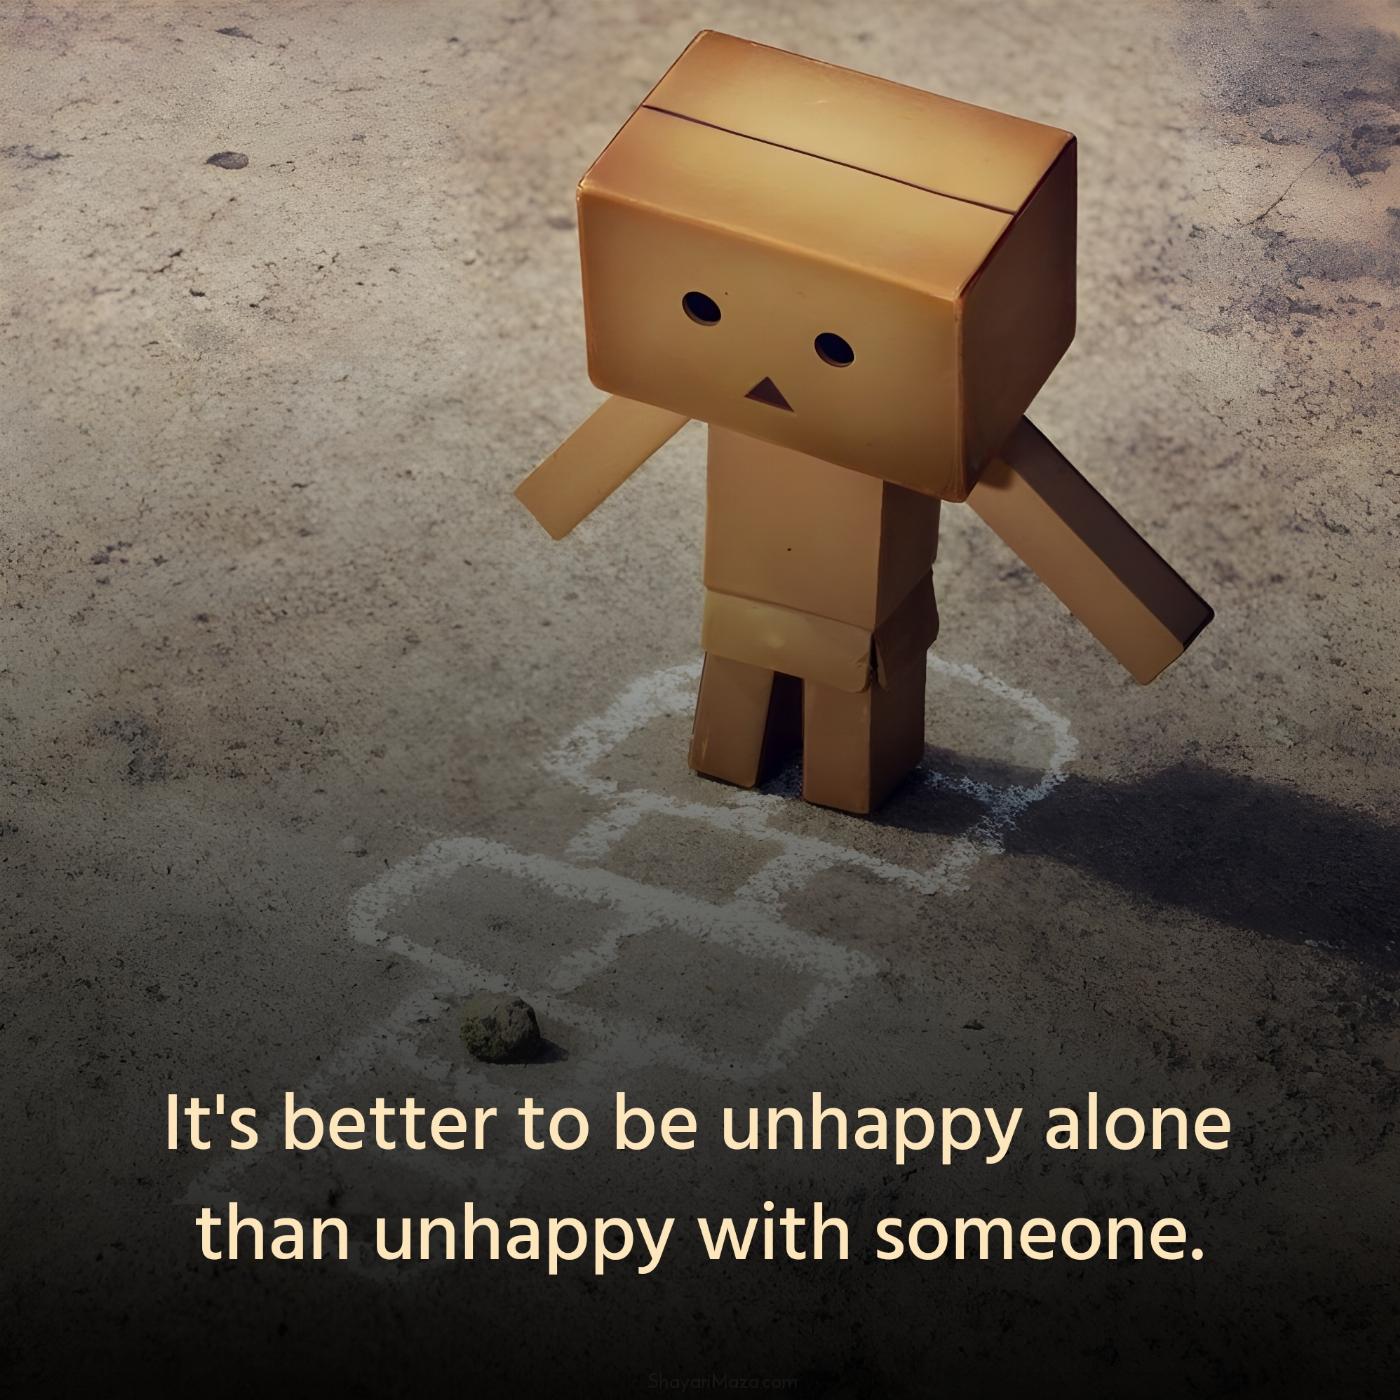 It's better to be unhappy alone than unhappy with someone